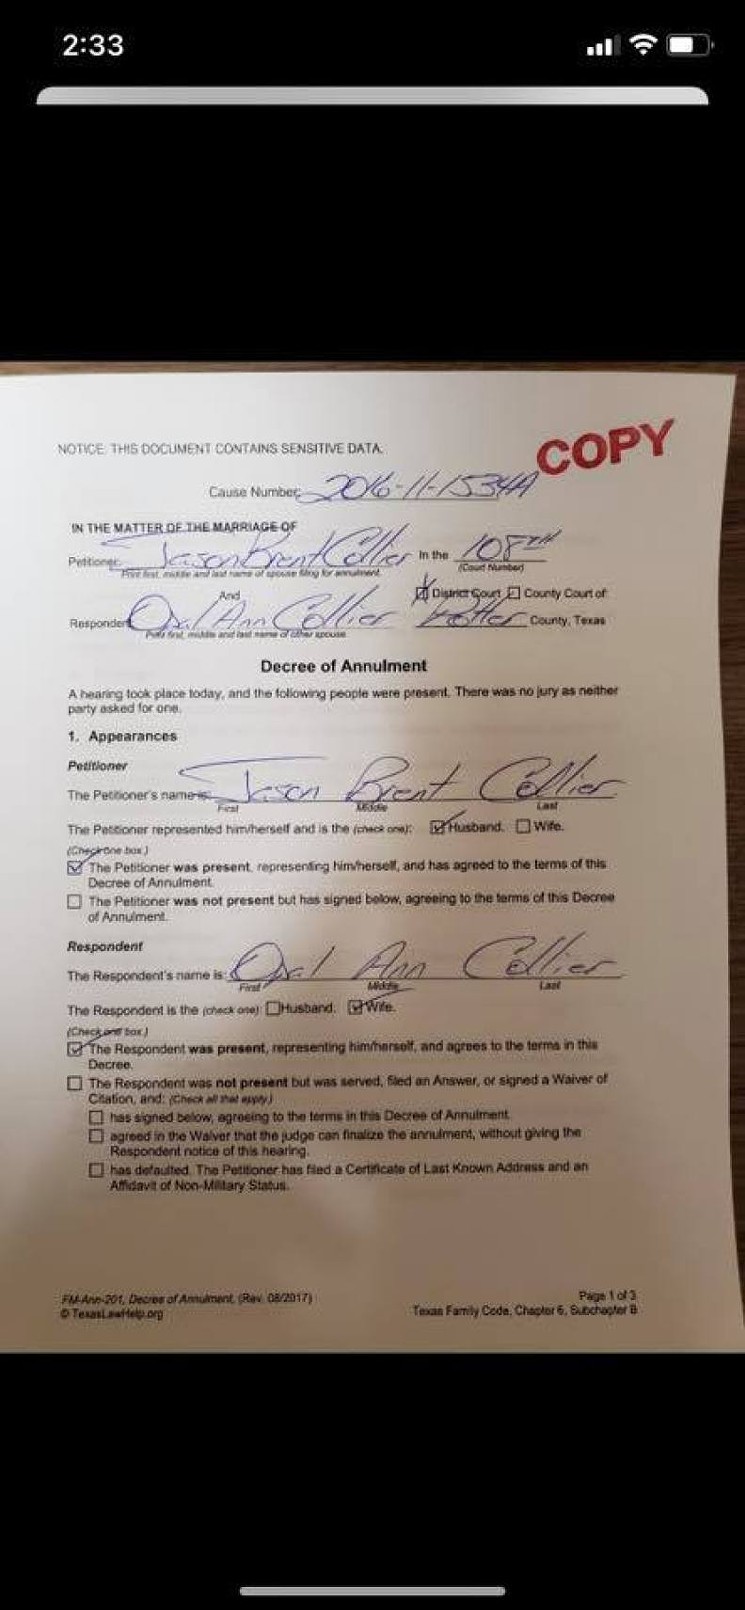 A photo of a document posted by Steinmetz, which she says she received from Collier. - SCREENSHOT FROM FACEBOOK